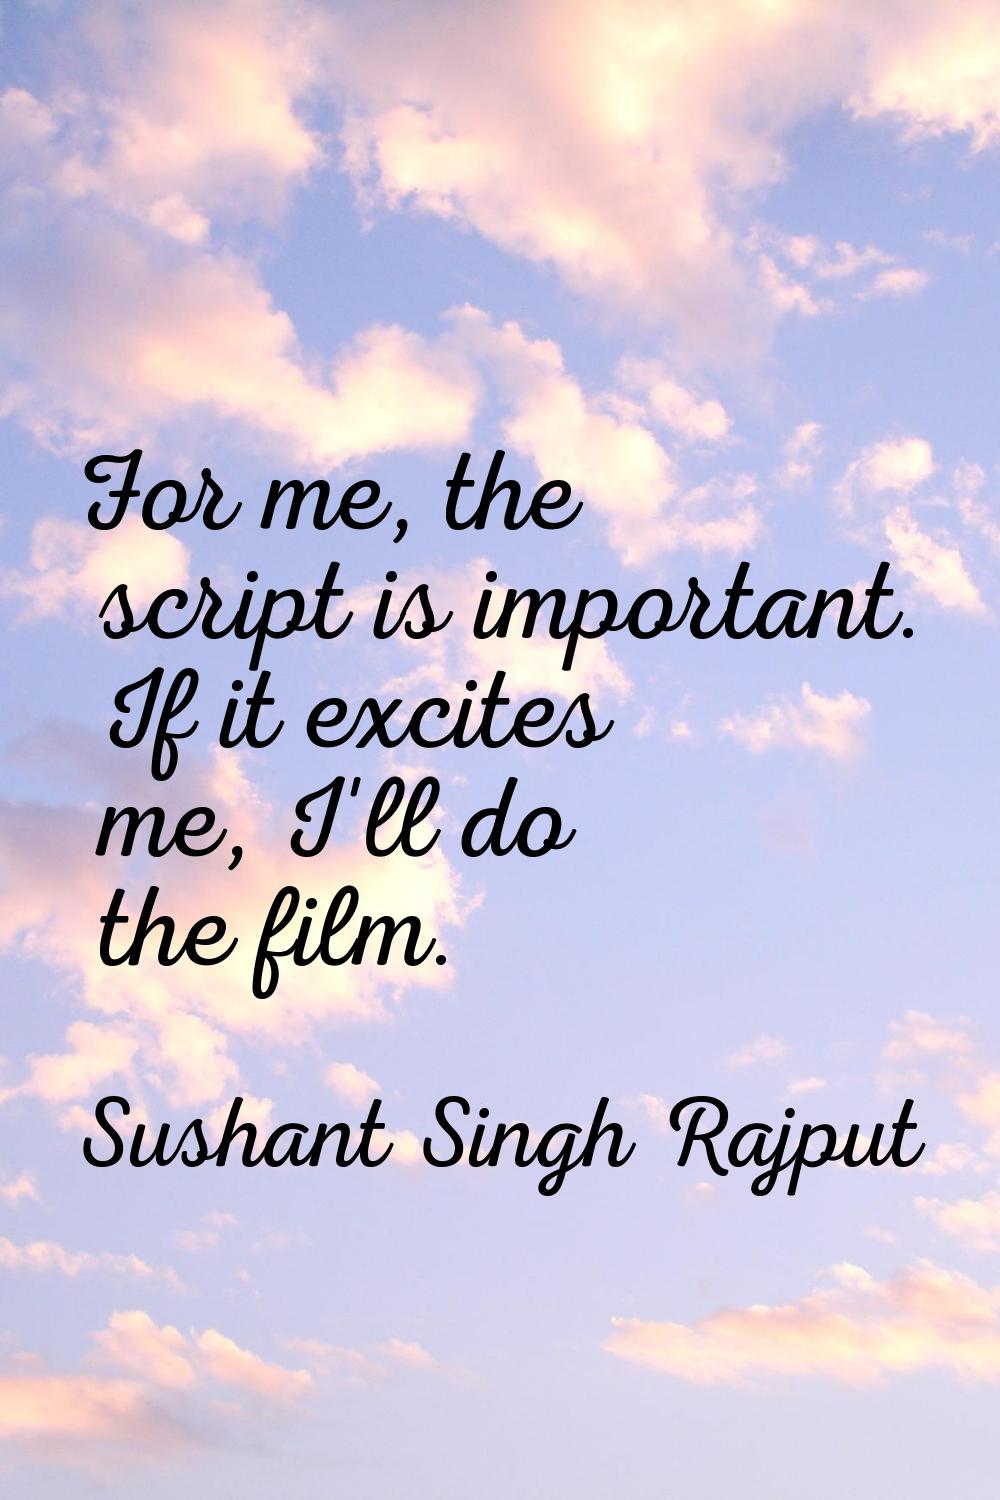 For me, the script is important. If it excites me, I'll do the film.